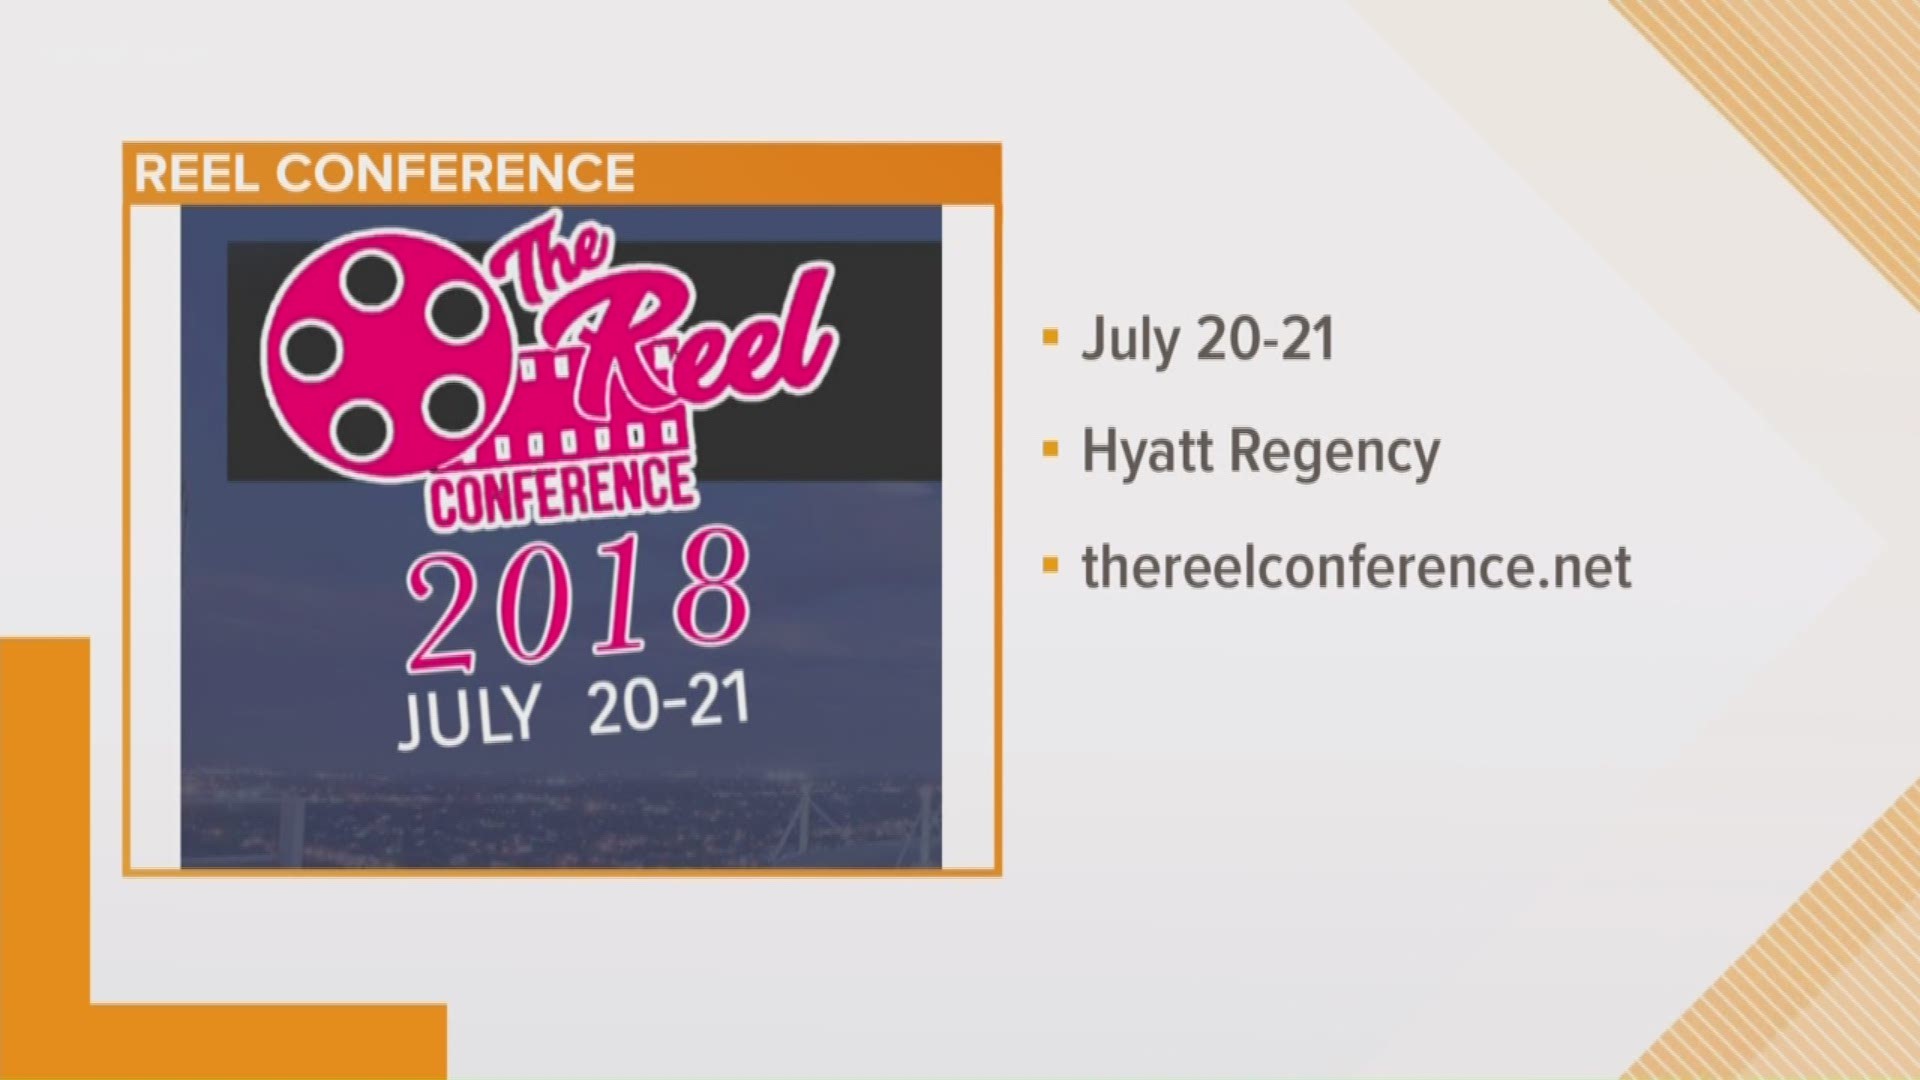 The "REEL Conference" takes place July 20 and 21 at the Hyatt Riverwalk. The conference features inspiring guest speakers and will honor local philanthropist, Gordan Hartman, as well as Miss San Antonio.